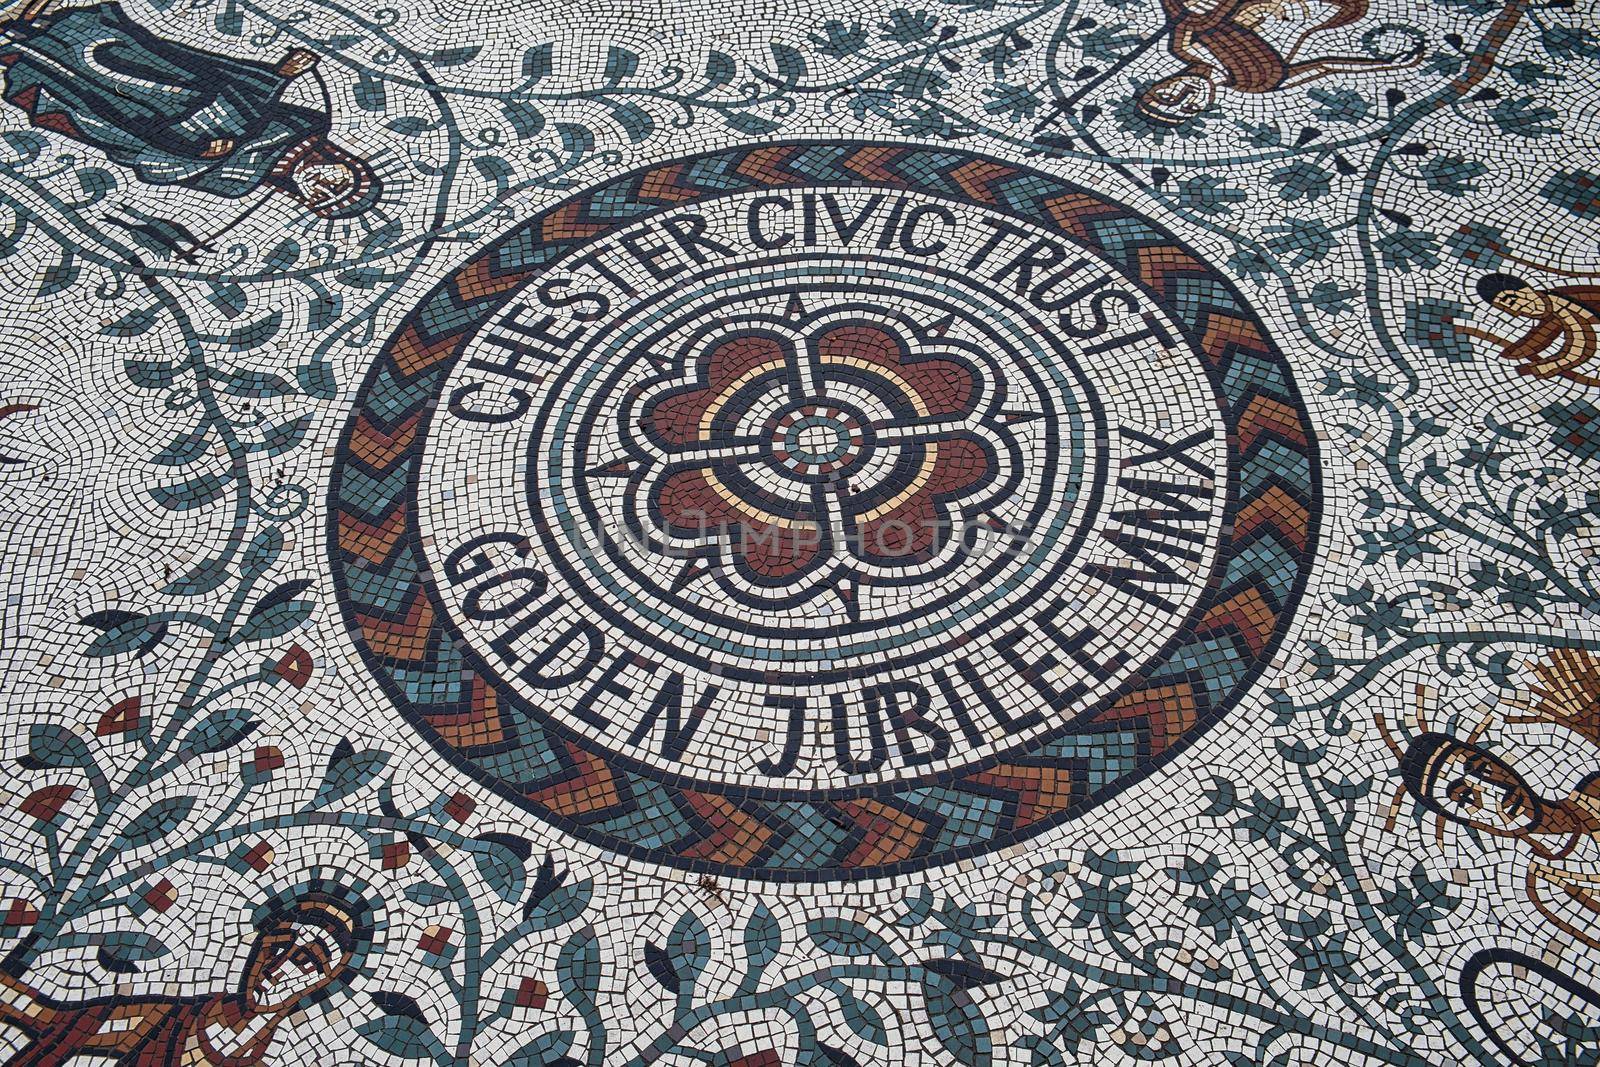 Modern Roman style mosaic at the entrance of the Roman Gardens created for the Golden Jubilee of Chester Civic Trust 2010, Chester, England.